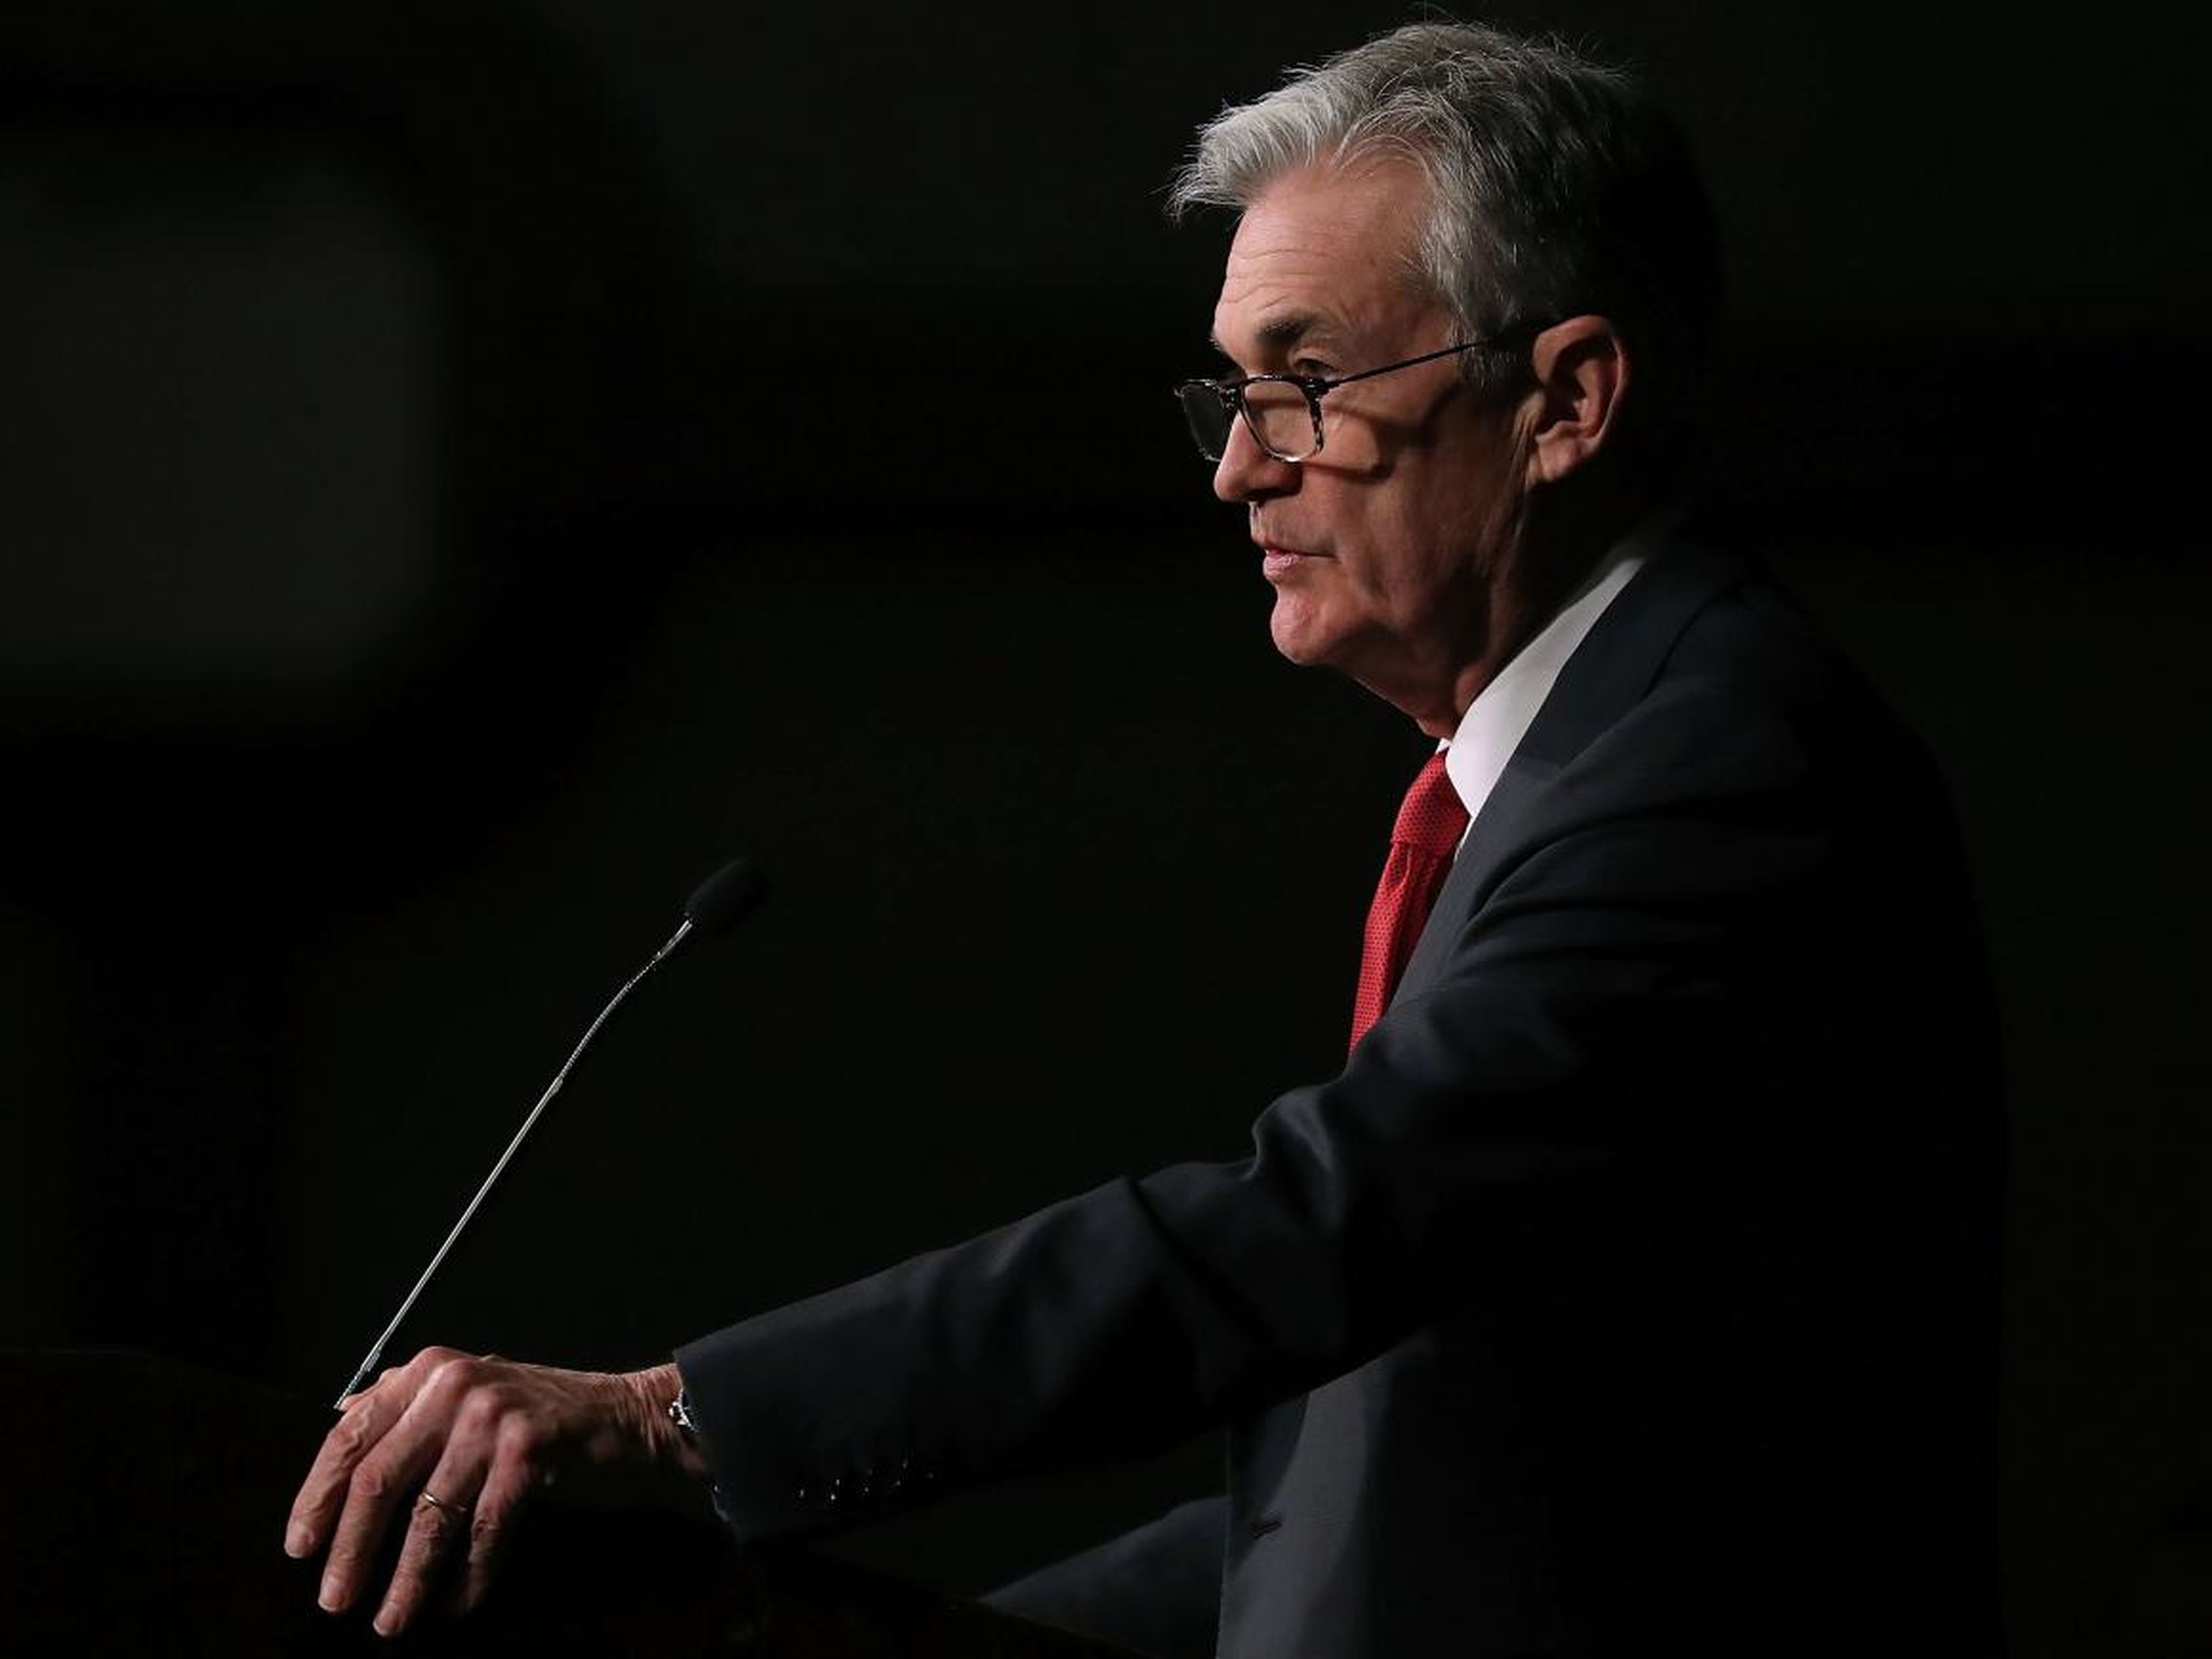 Federal Reserve Board Chairman Jerome Powell speaks at an event in Washington, DC.